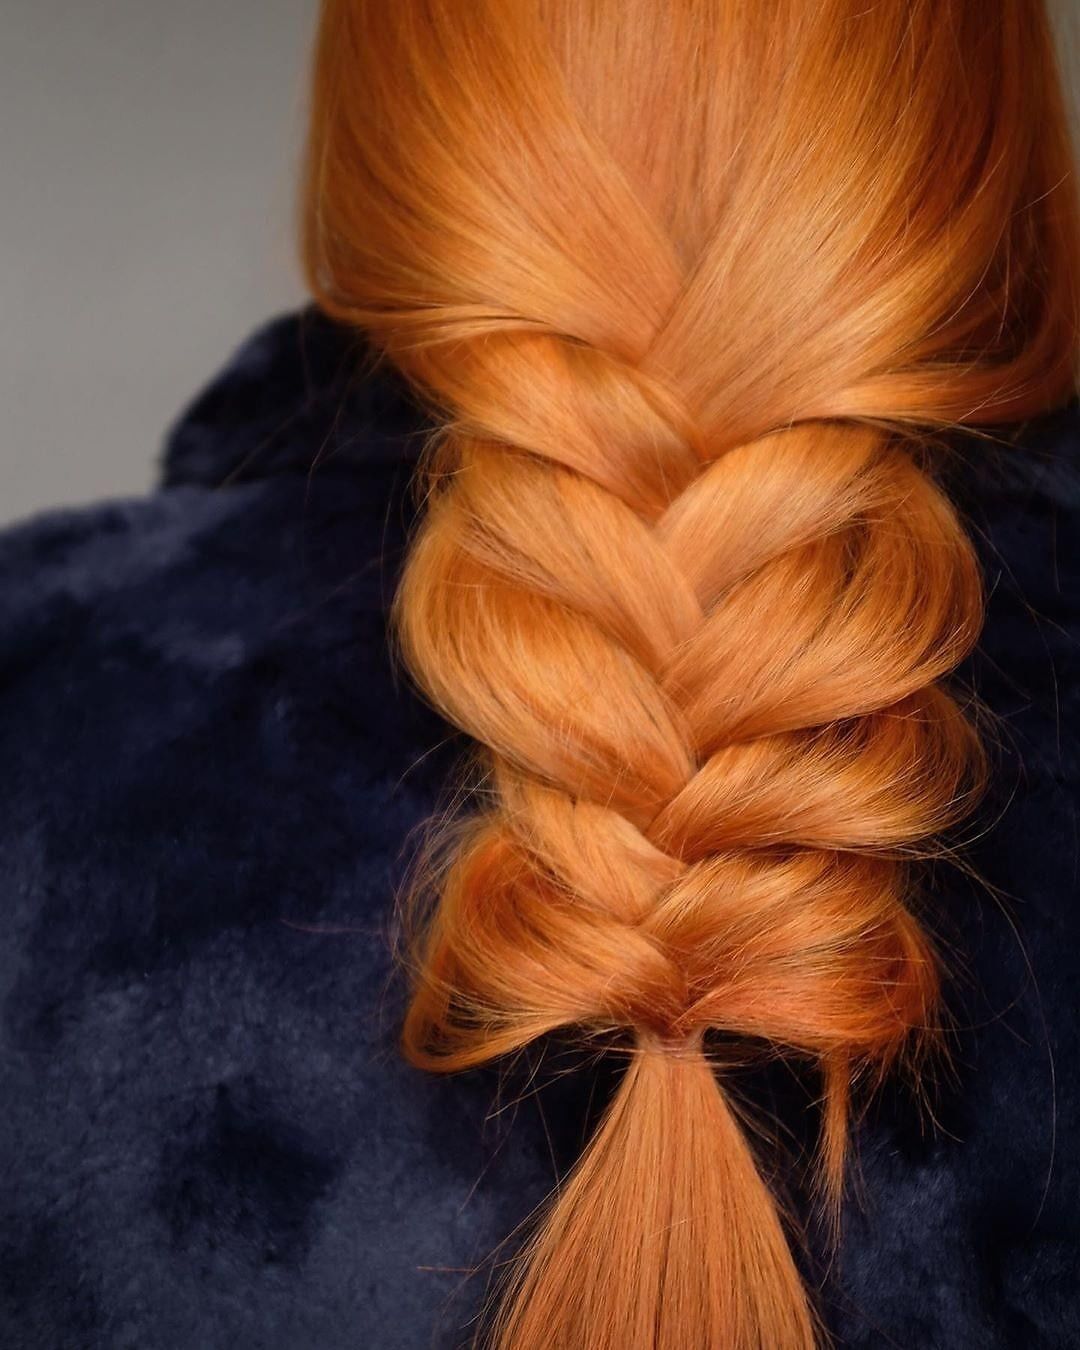 Schwarzkopf Professional - We LOVE a braid, especially when it’s this vibrant! 😍
*Formula* 👉 @stylebyseilerstudio toned with #IGORAVIBRANCE in 7-77 (30g) + 8-77 (20g) + 7-88 (4g) with 4% Developer.
#I...